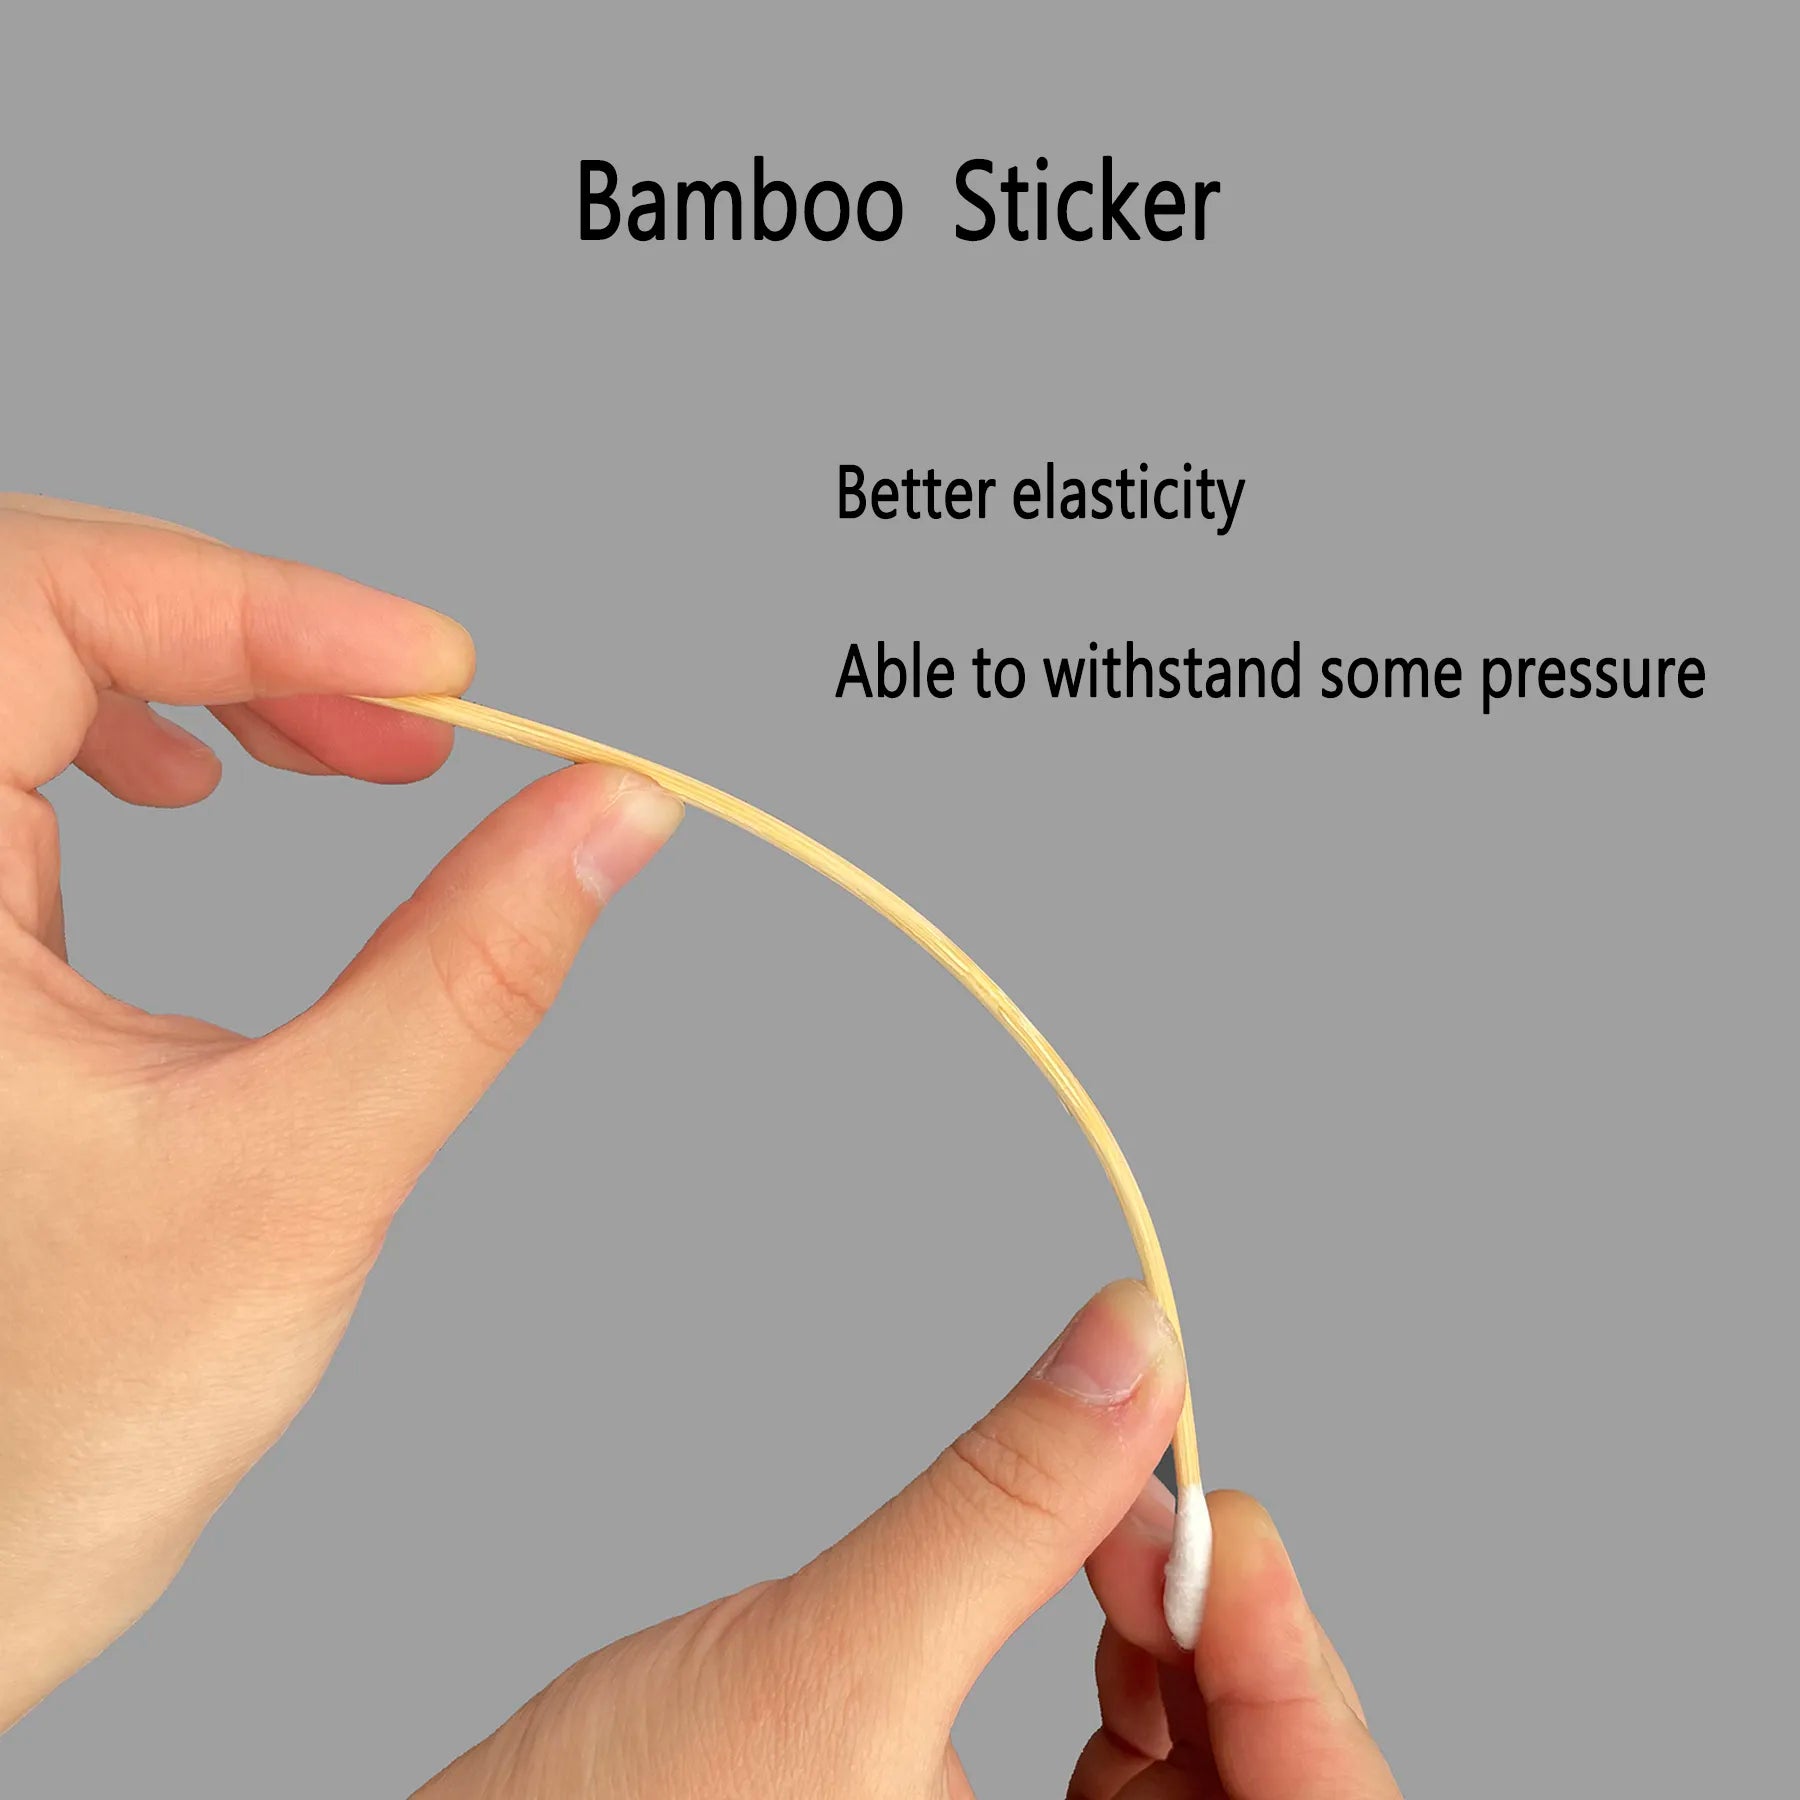 100 PCS Cleaning 6 Inch Long Cotton Swabs with Bamboo Handle for 9mm 5.56mm